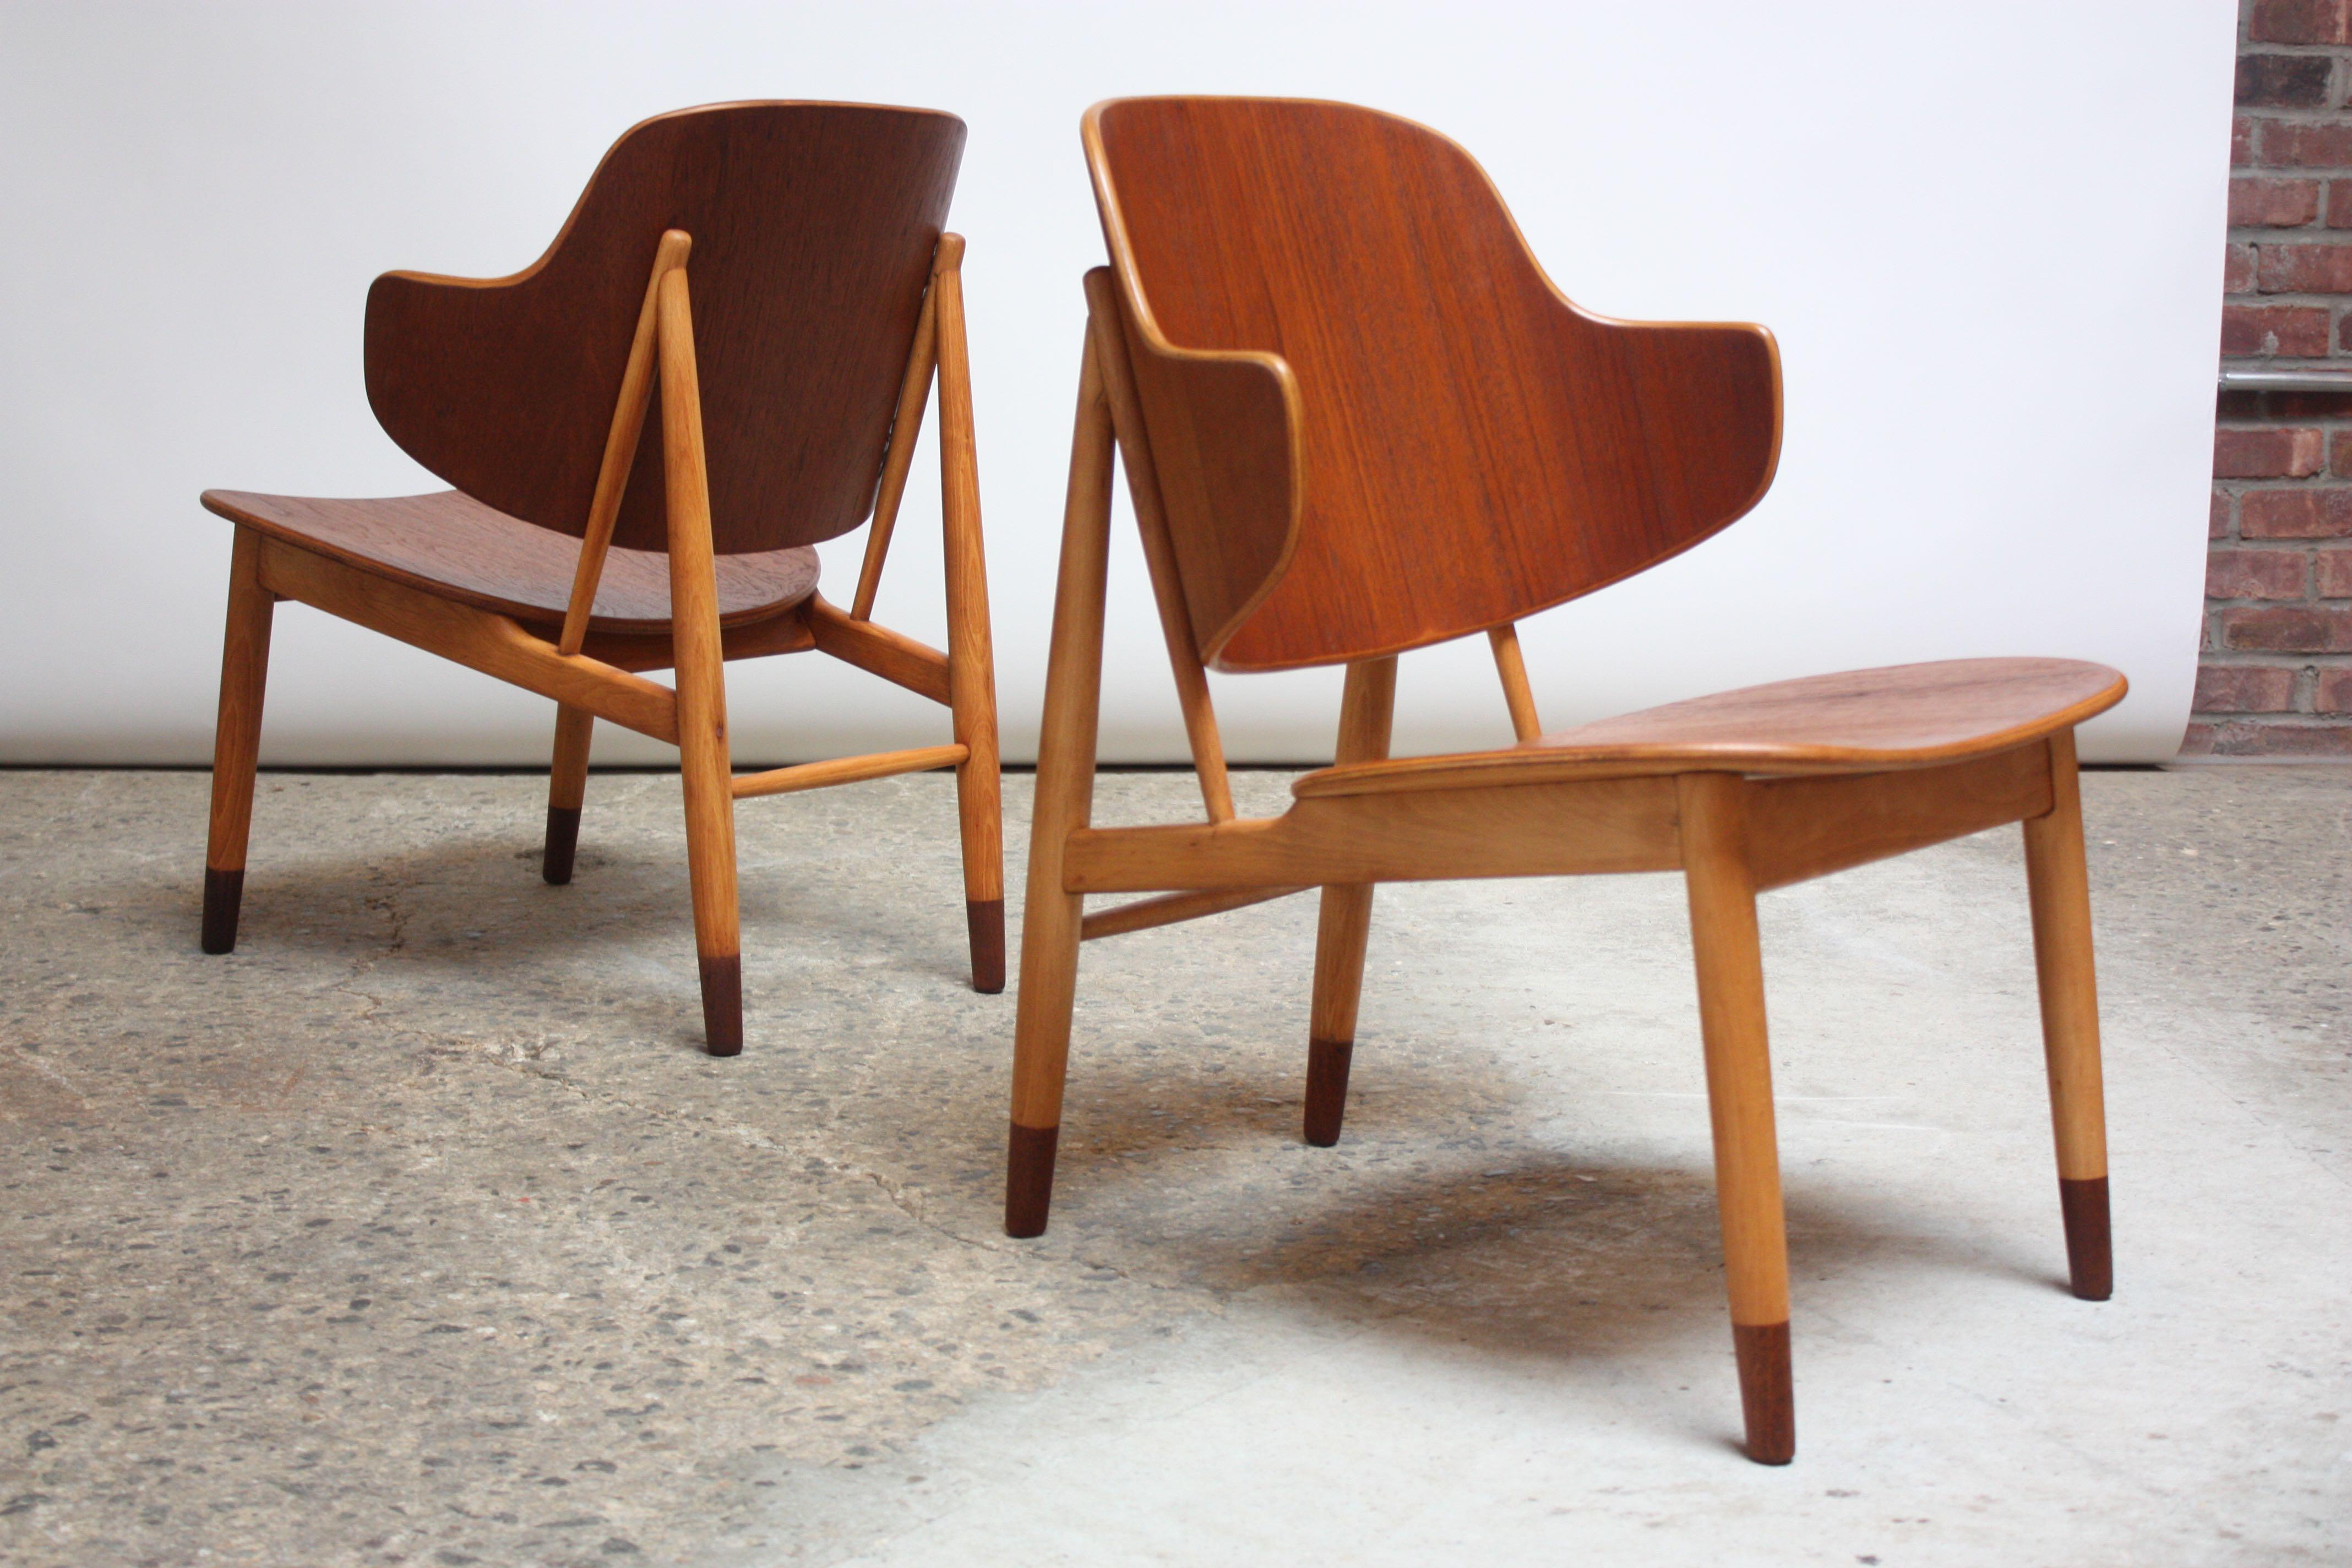 Pair of 1950s Danish beech and teak shell chairs designed by Ib Kofod-Larsen for Christensen & Larsen. Composed of a deeply sculpted bent-teakwood back and seat mounted to a beech frame offering a 'two-tone' contrast with the lightness of the beech